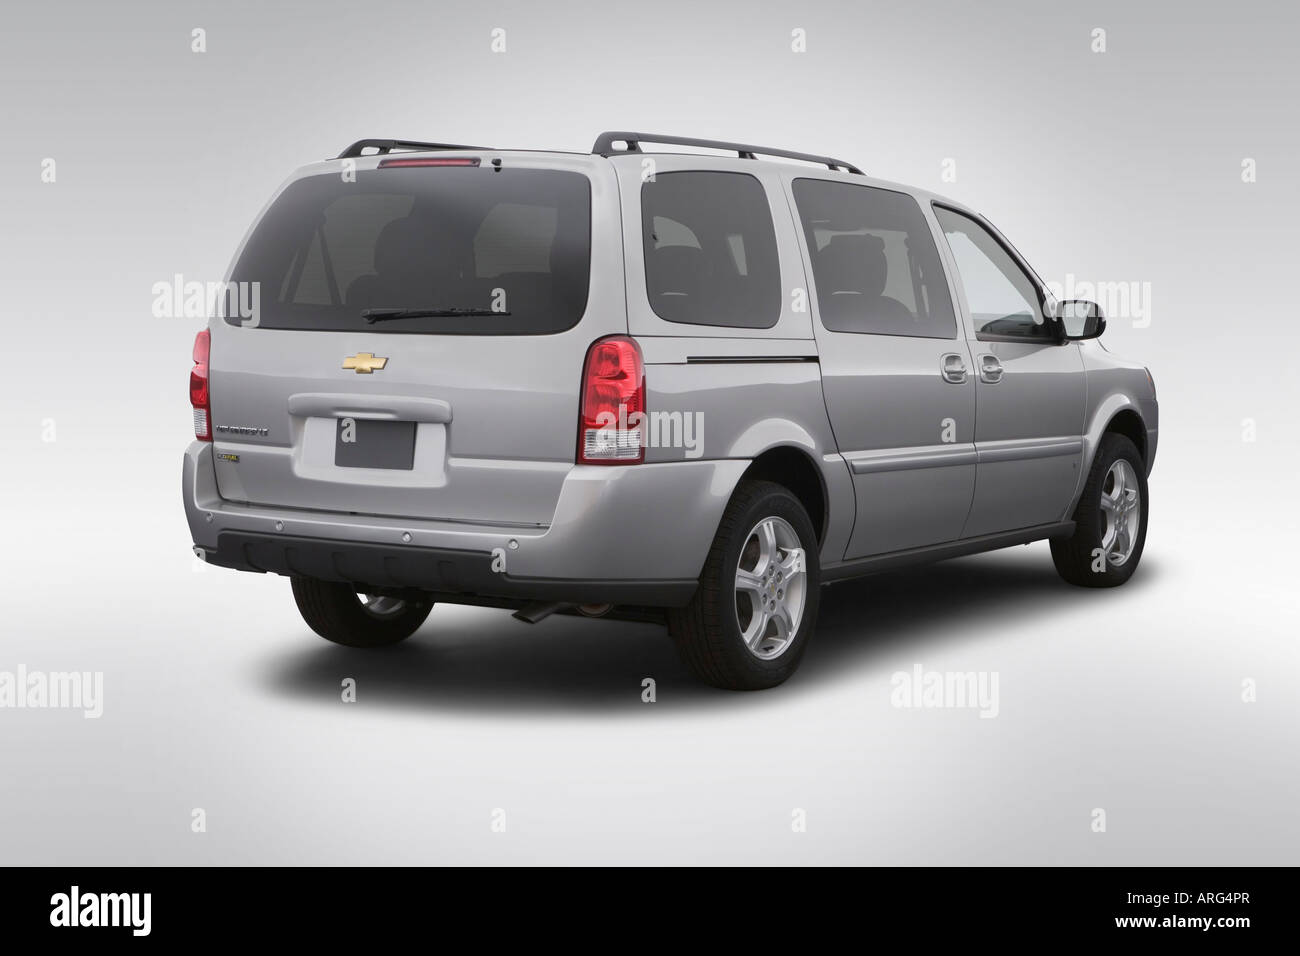 2007 Chevrolet Uplander LT in Silver - Rear angle view Stock Photo